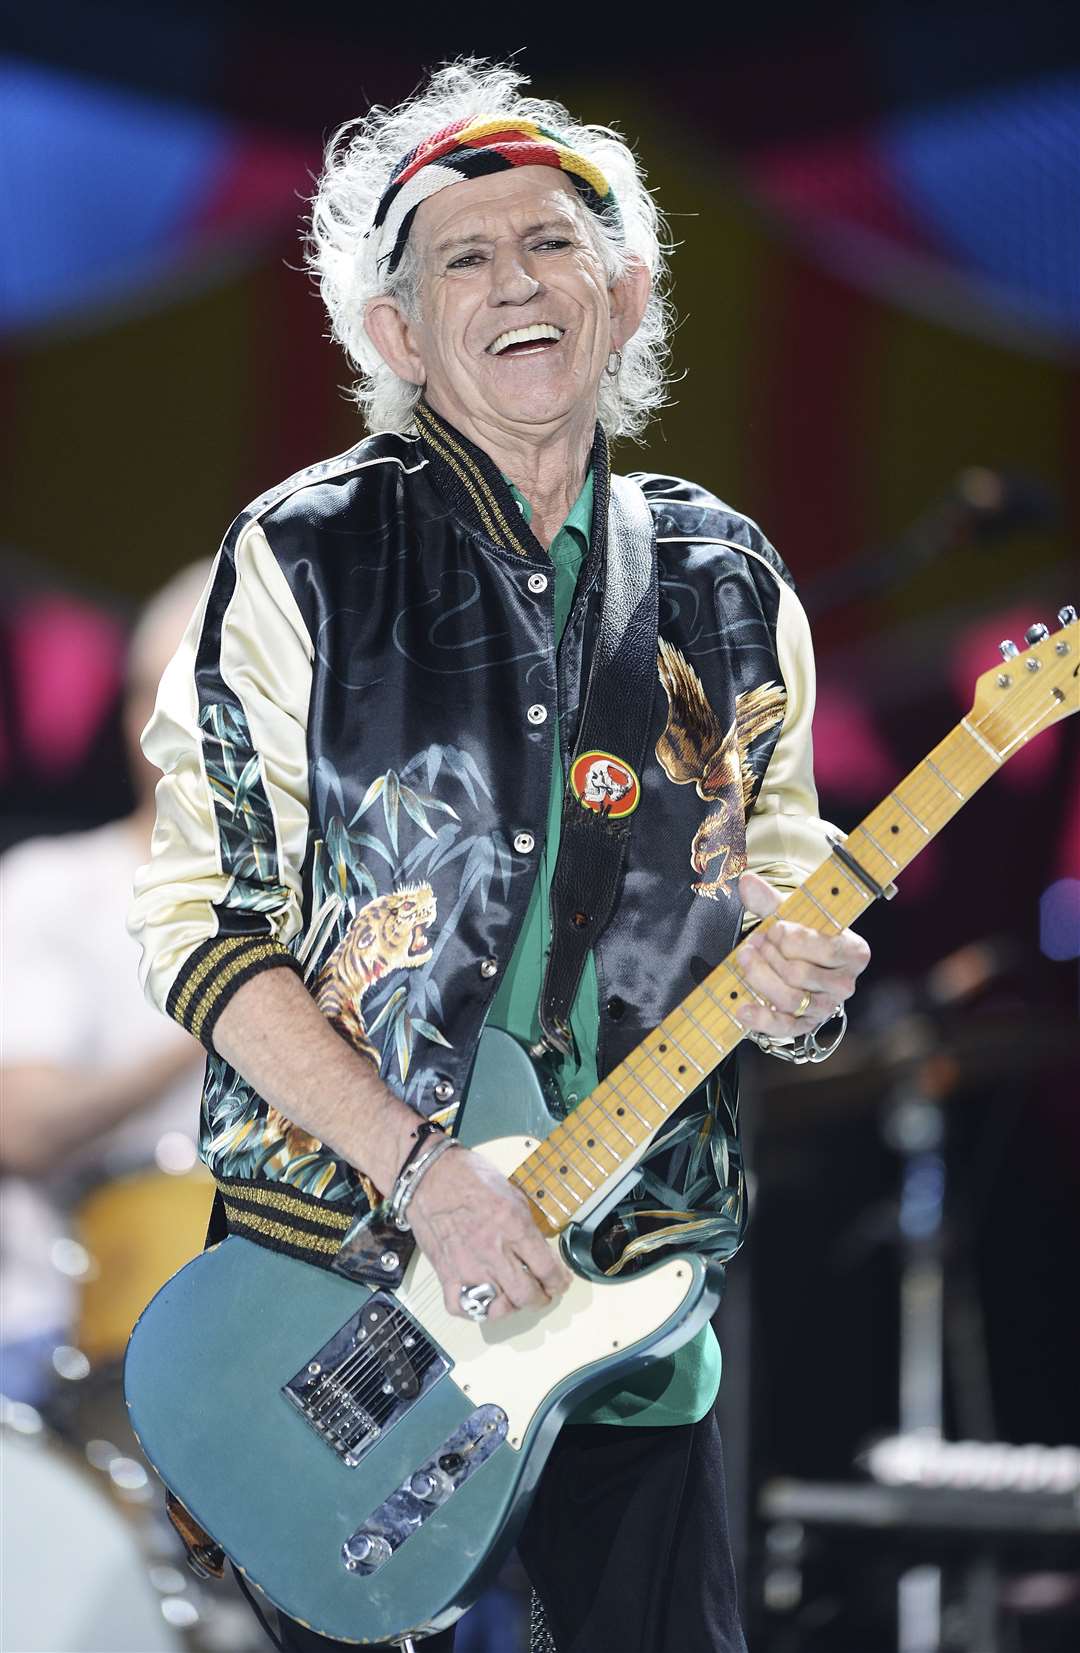 Keith Richards during The Rolling Stones concert at Ciudad Deportiva on March 25, 2016 in Havana, Cuba. Picture: Dave Hogan